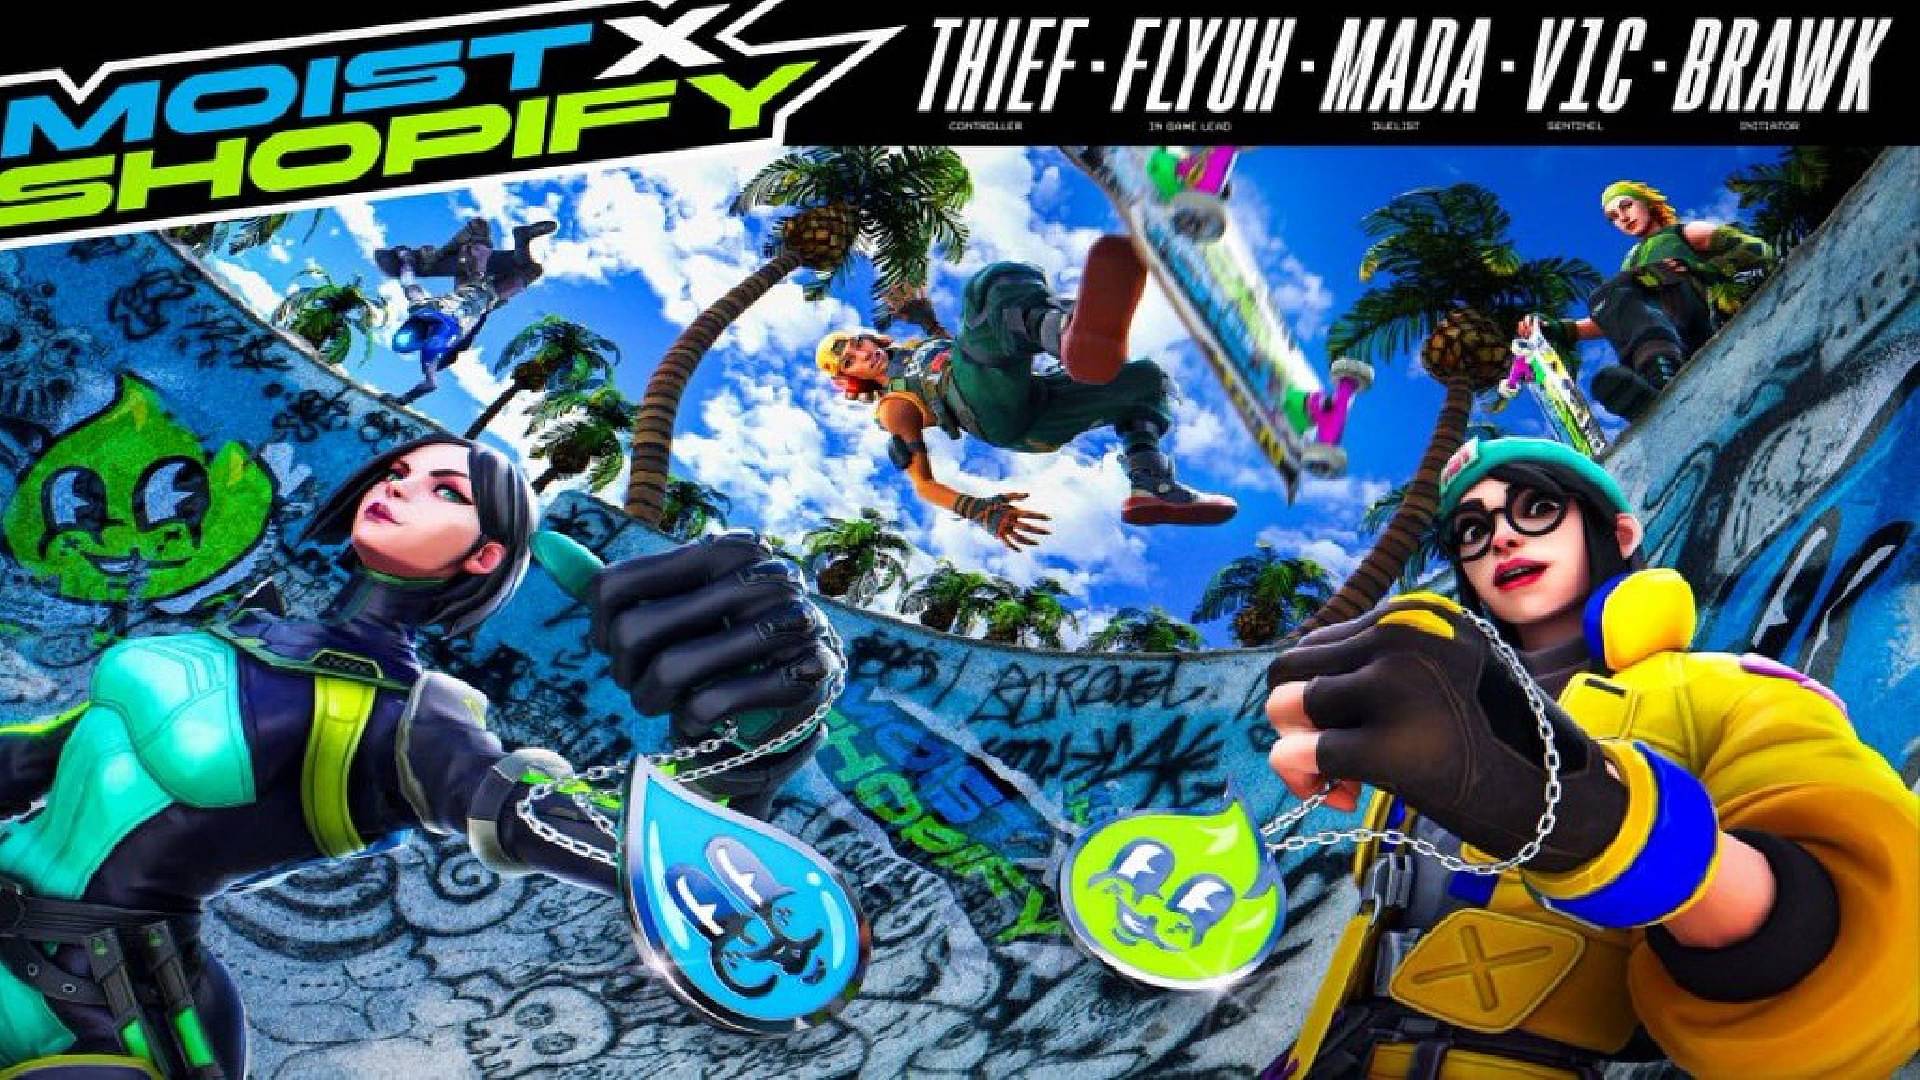 An image of the MxS promotional poster